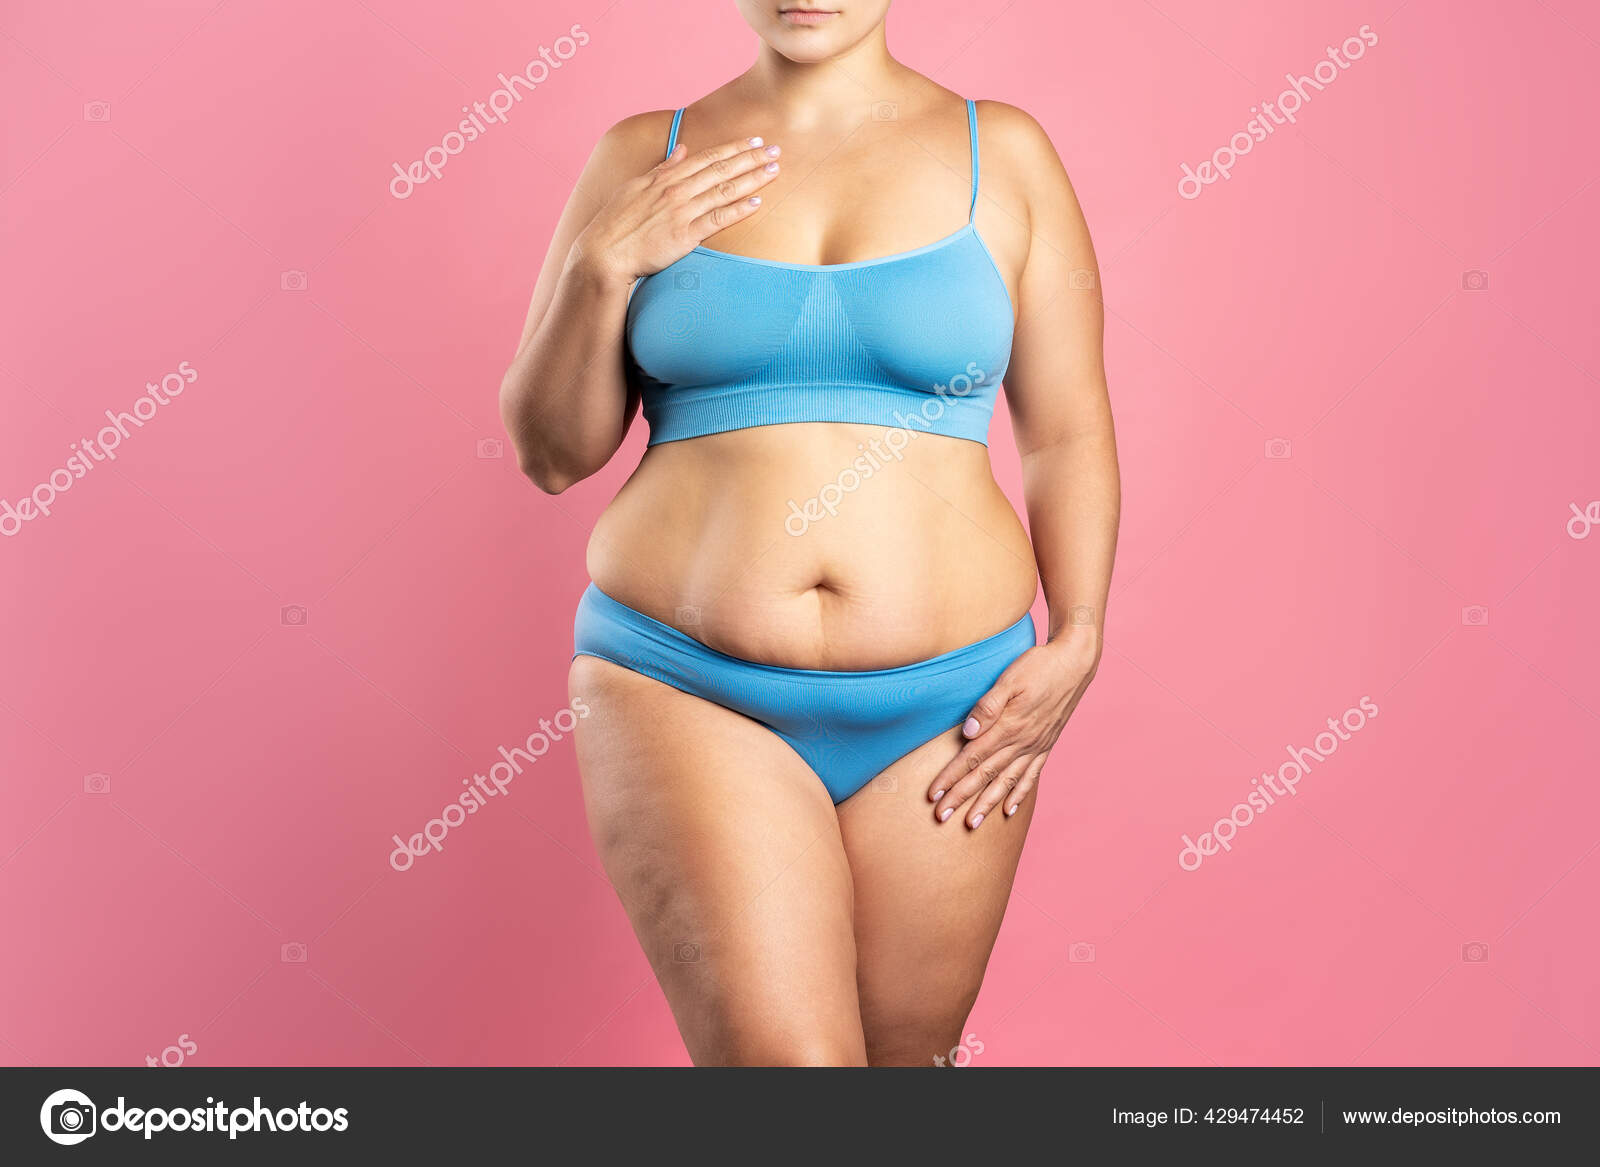 Fat woman with very large breasts in blue underwear on pink background, •  wall stickers panty, top, blue